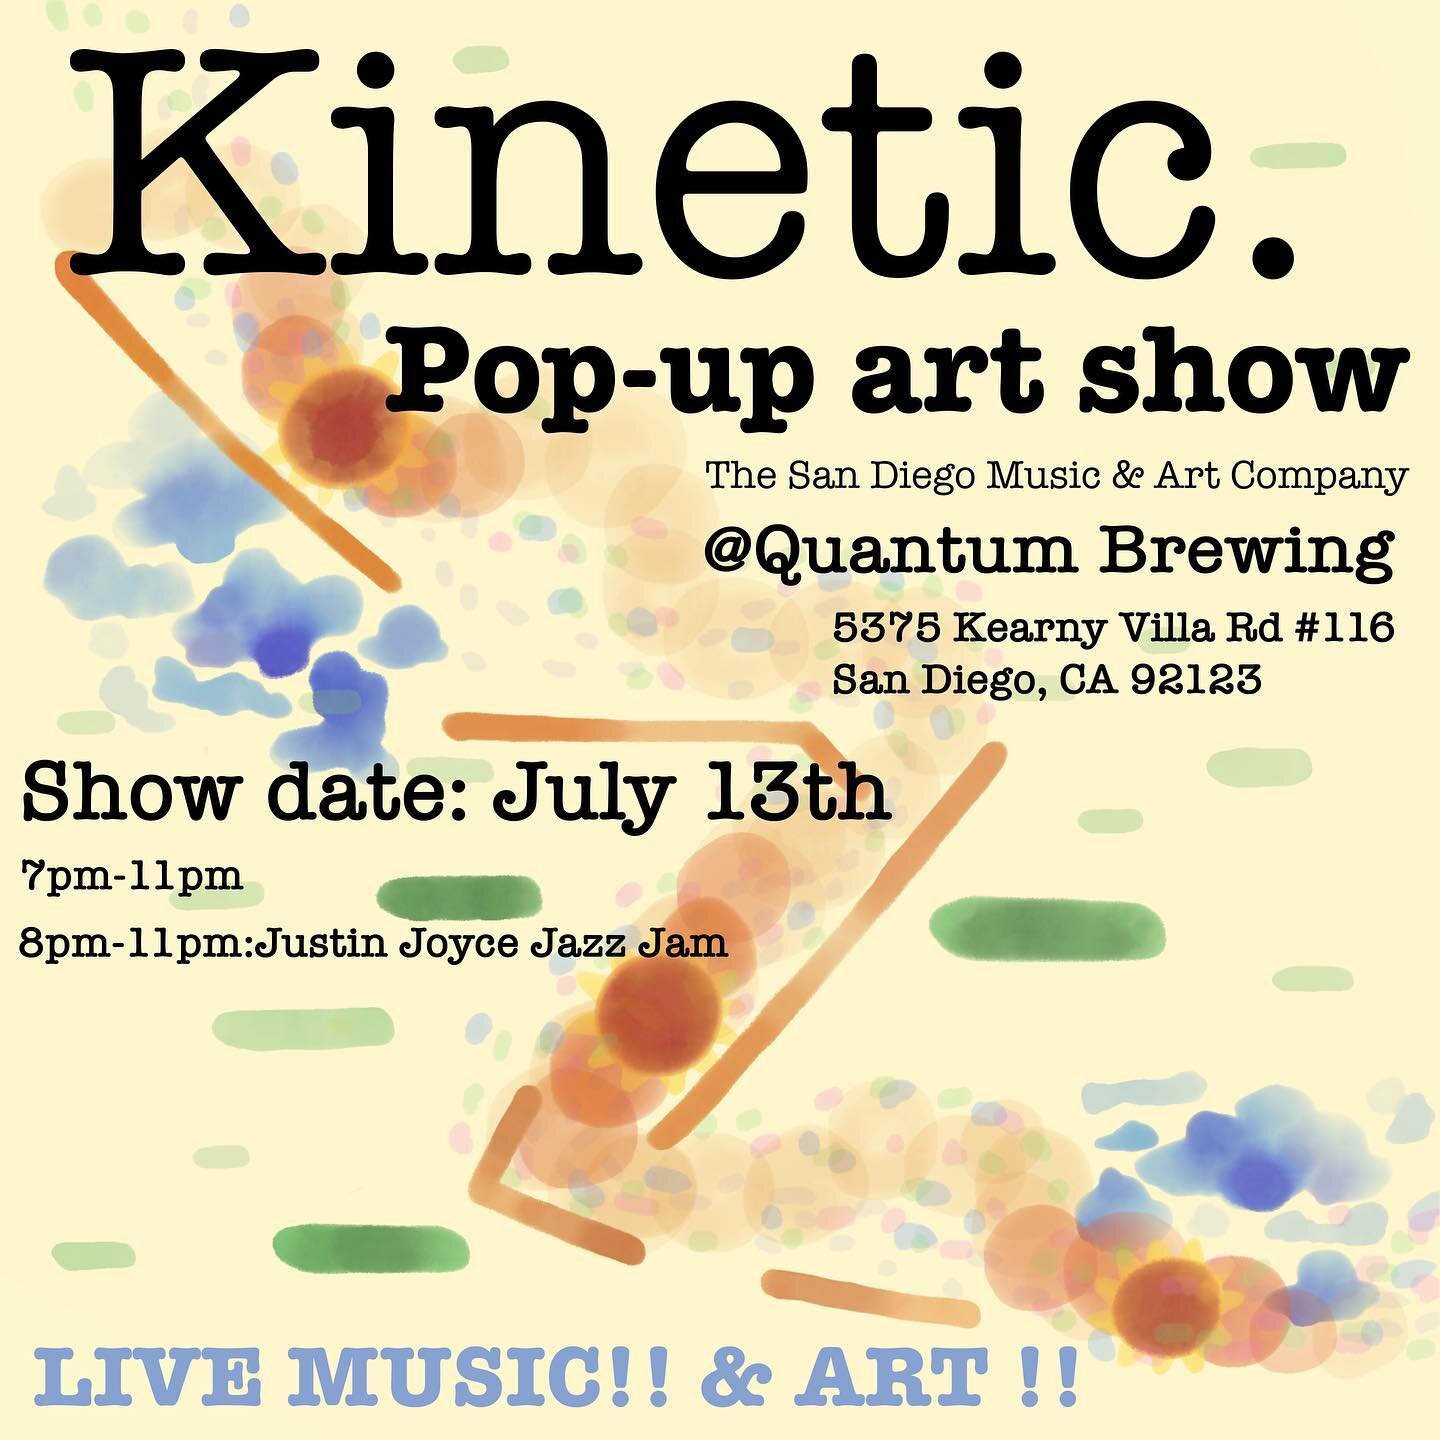 ⟿ KINETIC Pop-up Art Show at Quantum Brewing | Tomorrow, Wednesday, July 13th, 2022 | 7 pm- 11 pm ⬳
The San Diego Music and Art Gallery invites you to spend the night with us being moved by great art, music, and scientifically curated beer at Kinetic